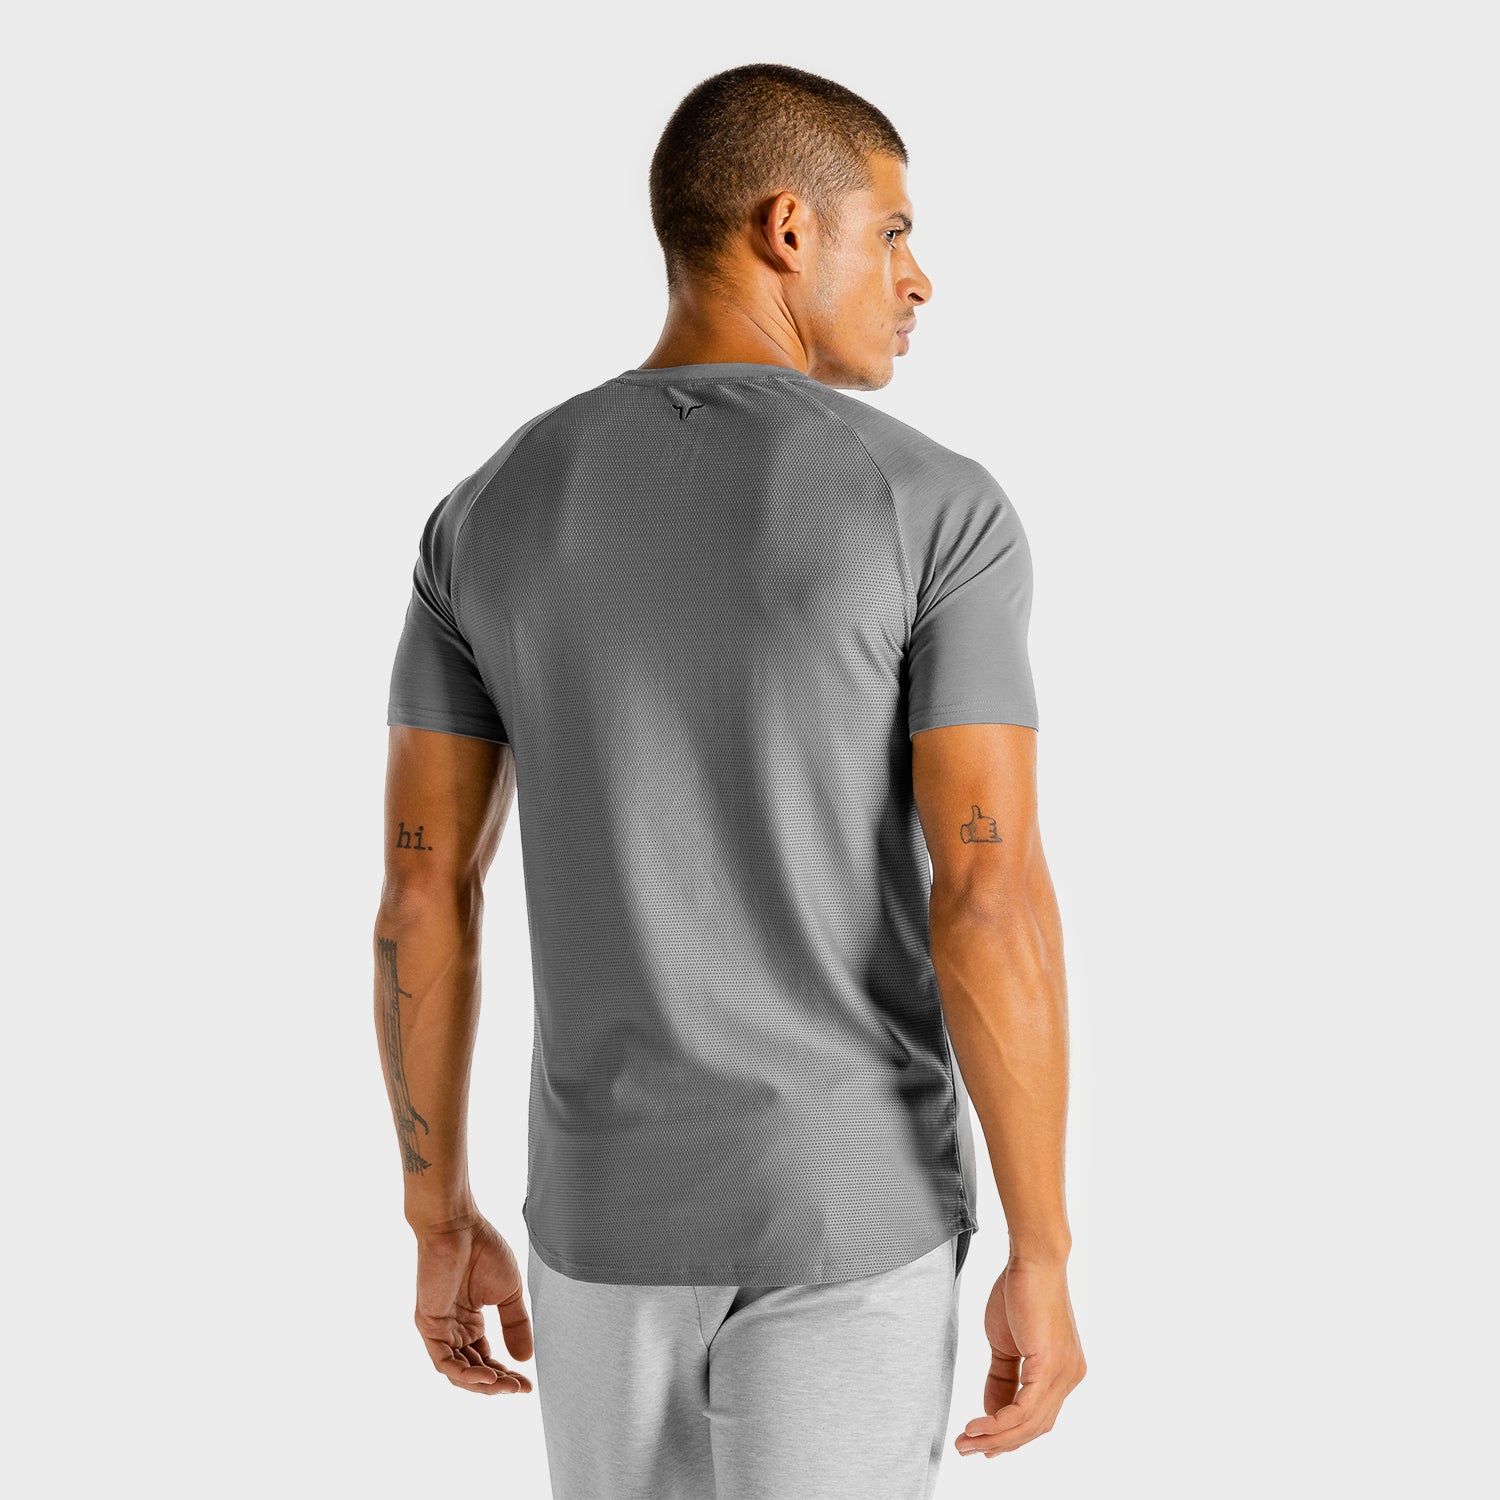 squatwolf-gym-wear-core-tee-grey-workout-shirts-for-men